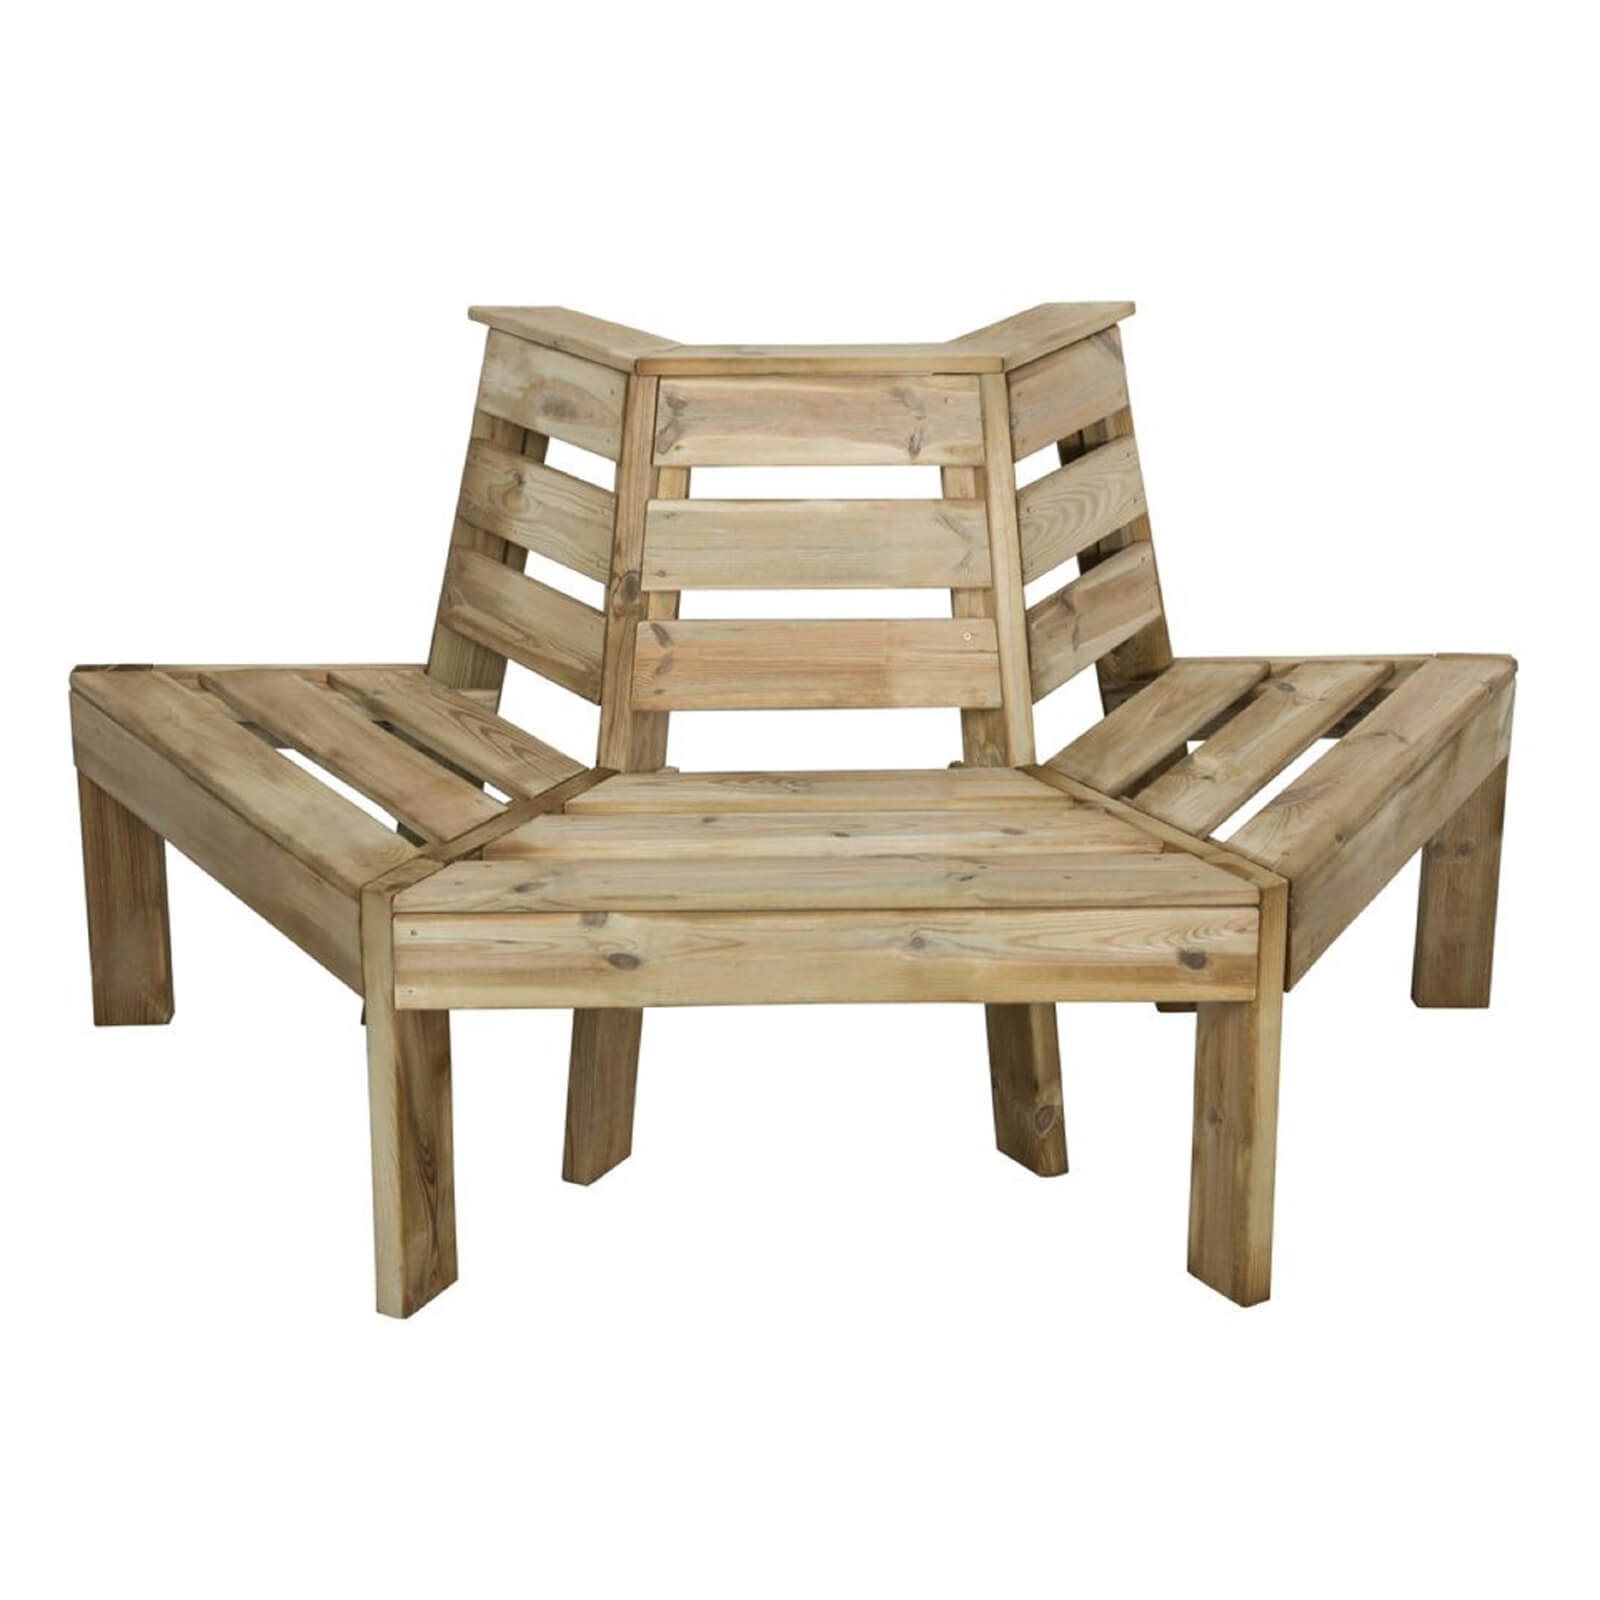 Forest Wooden Tree Seat